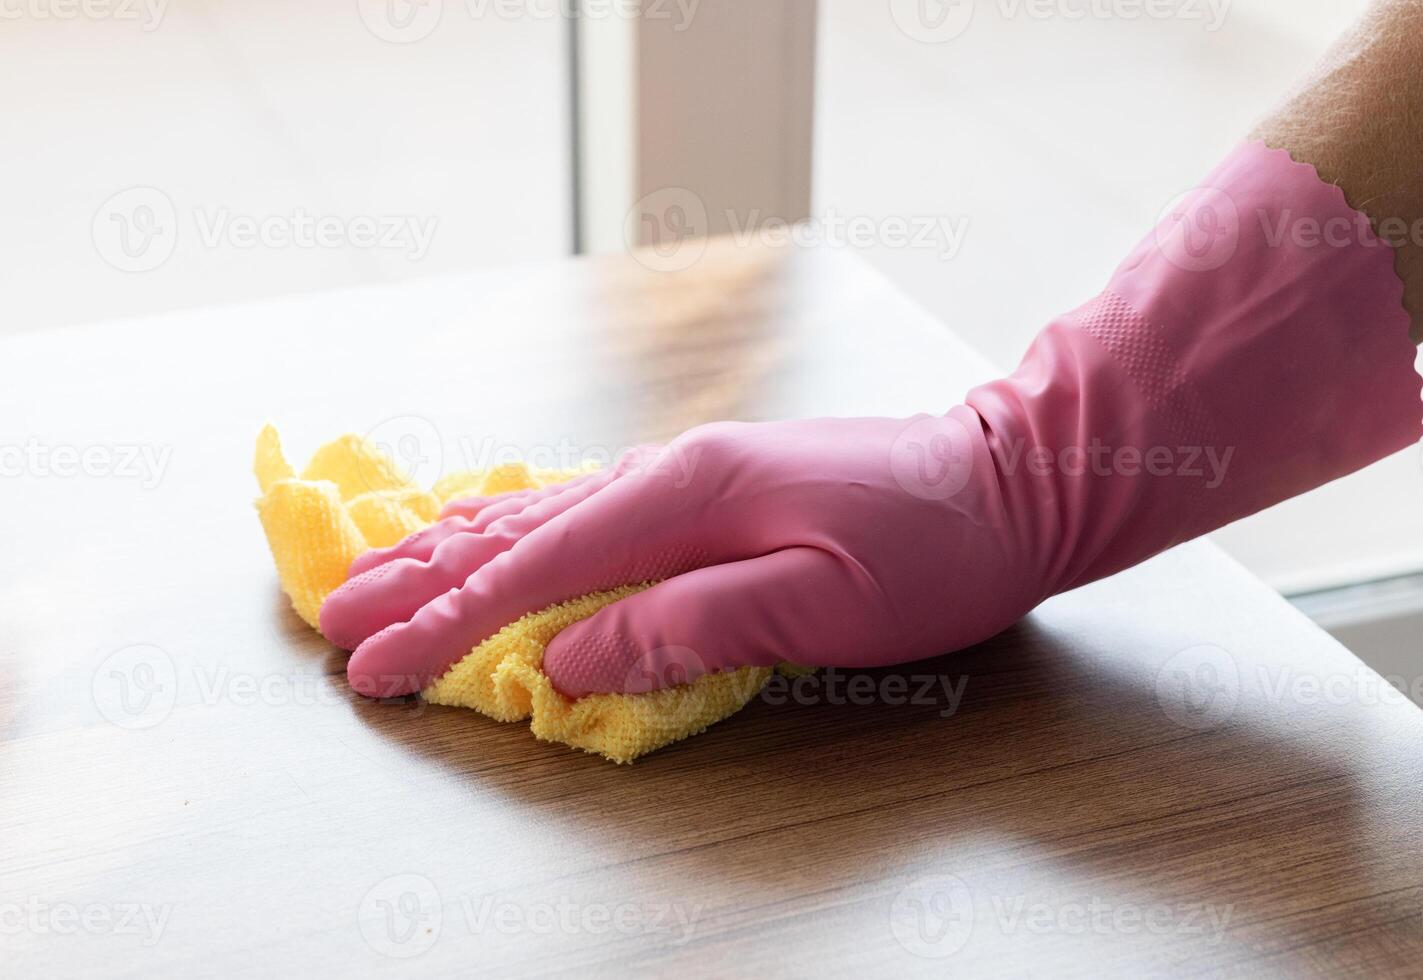 a hand in a pink glove wipes the surface of a wooden table with yellow microfiber. High quality photo